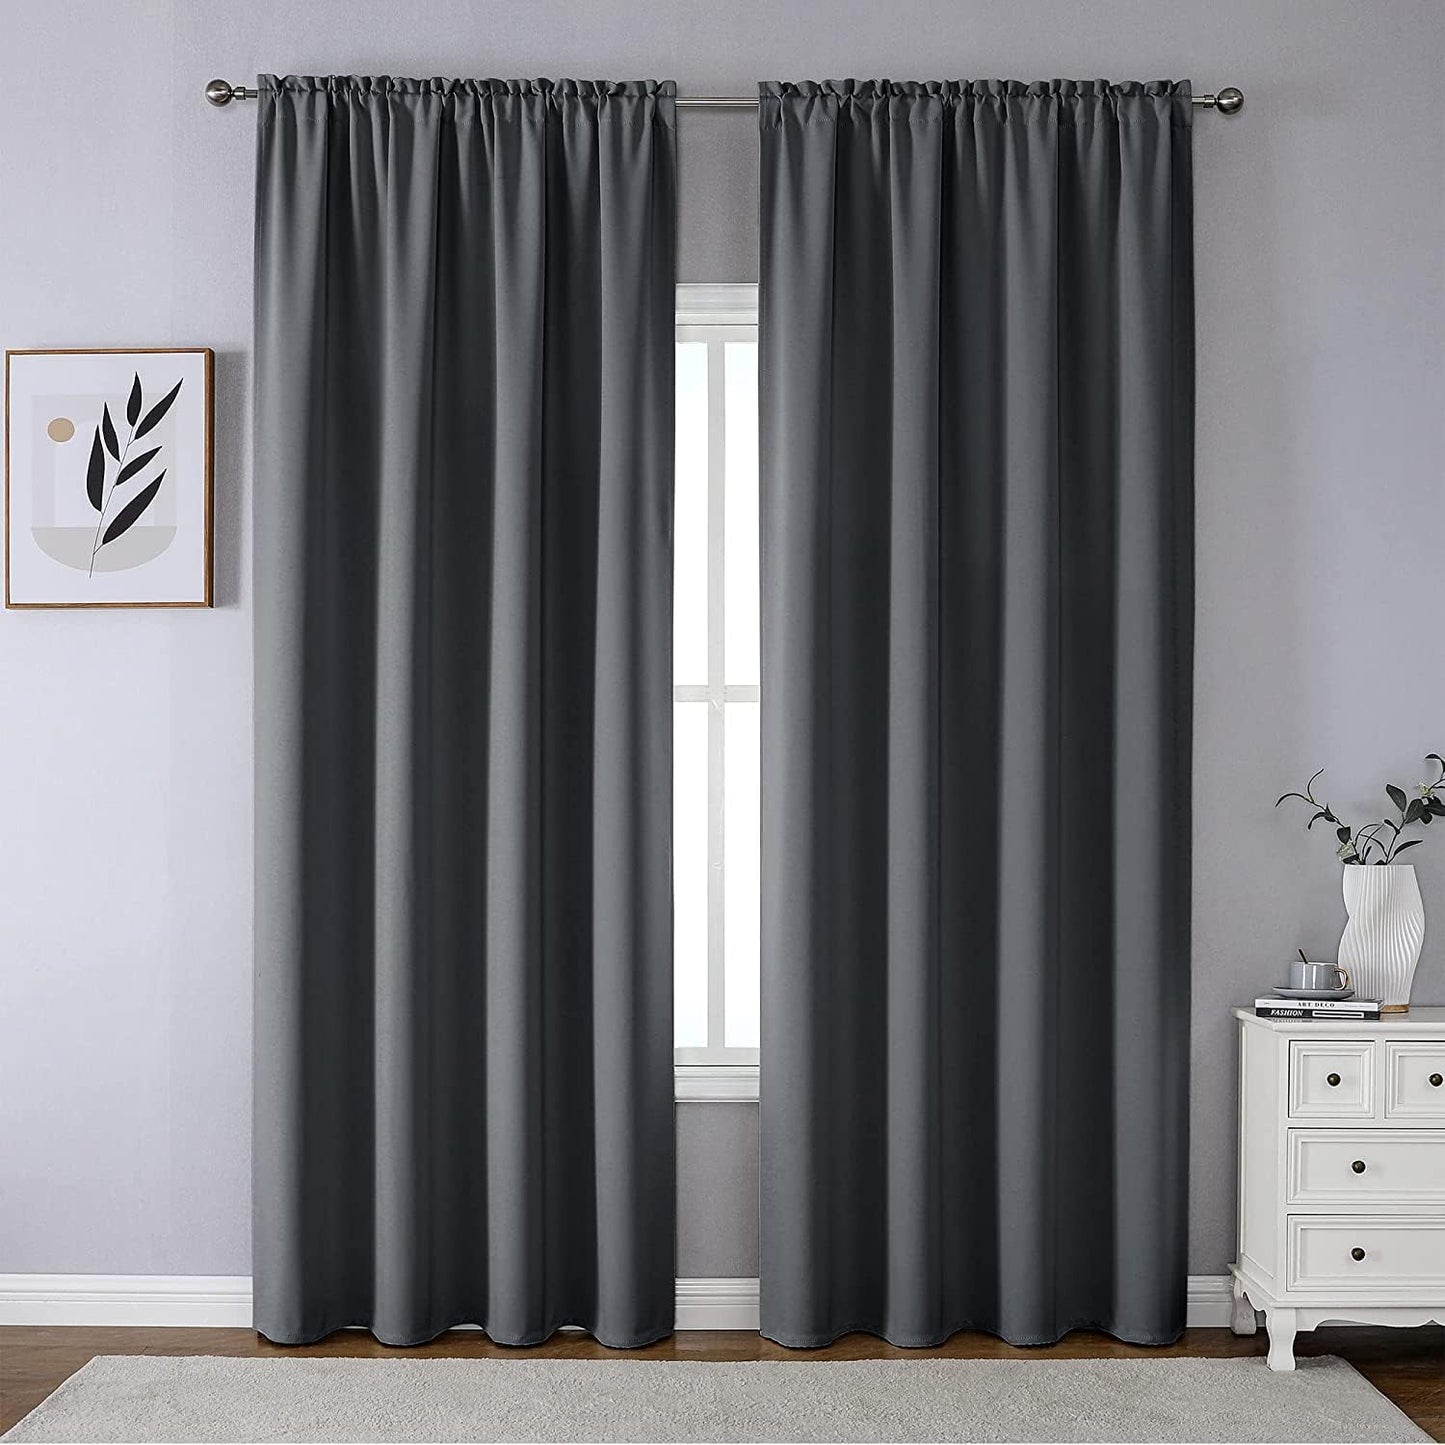 CUCRAF Blackout Curtains 84 Inches Long for Living Room, Light Beige Room Darkening Window Curtain Panels, Rod Pocket Thermal Insulated Solid Drapes for Bedroom, 52X84 Inch, Set of 2 Panels  CUCRAF Dark Grey 52W X 90L Inch 2 Panels 